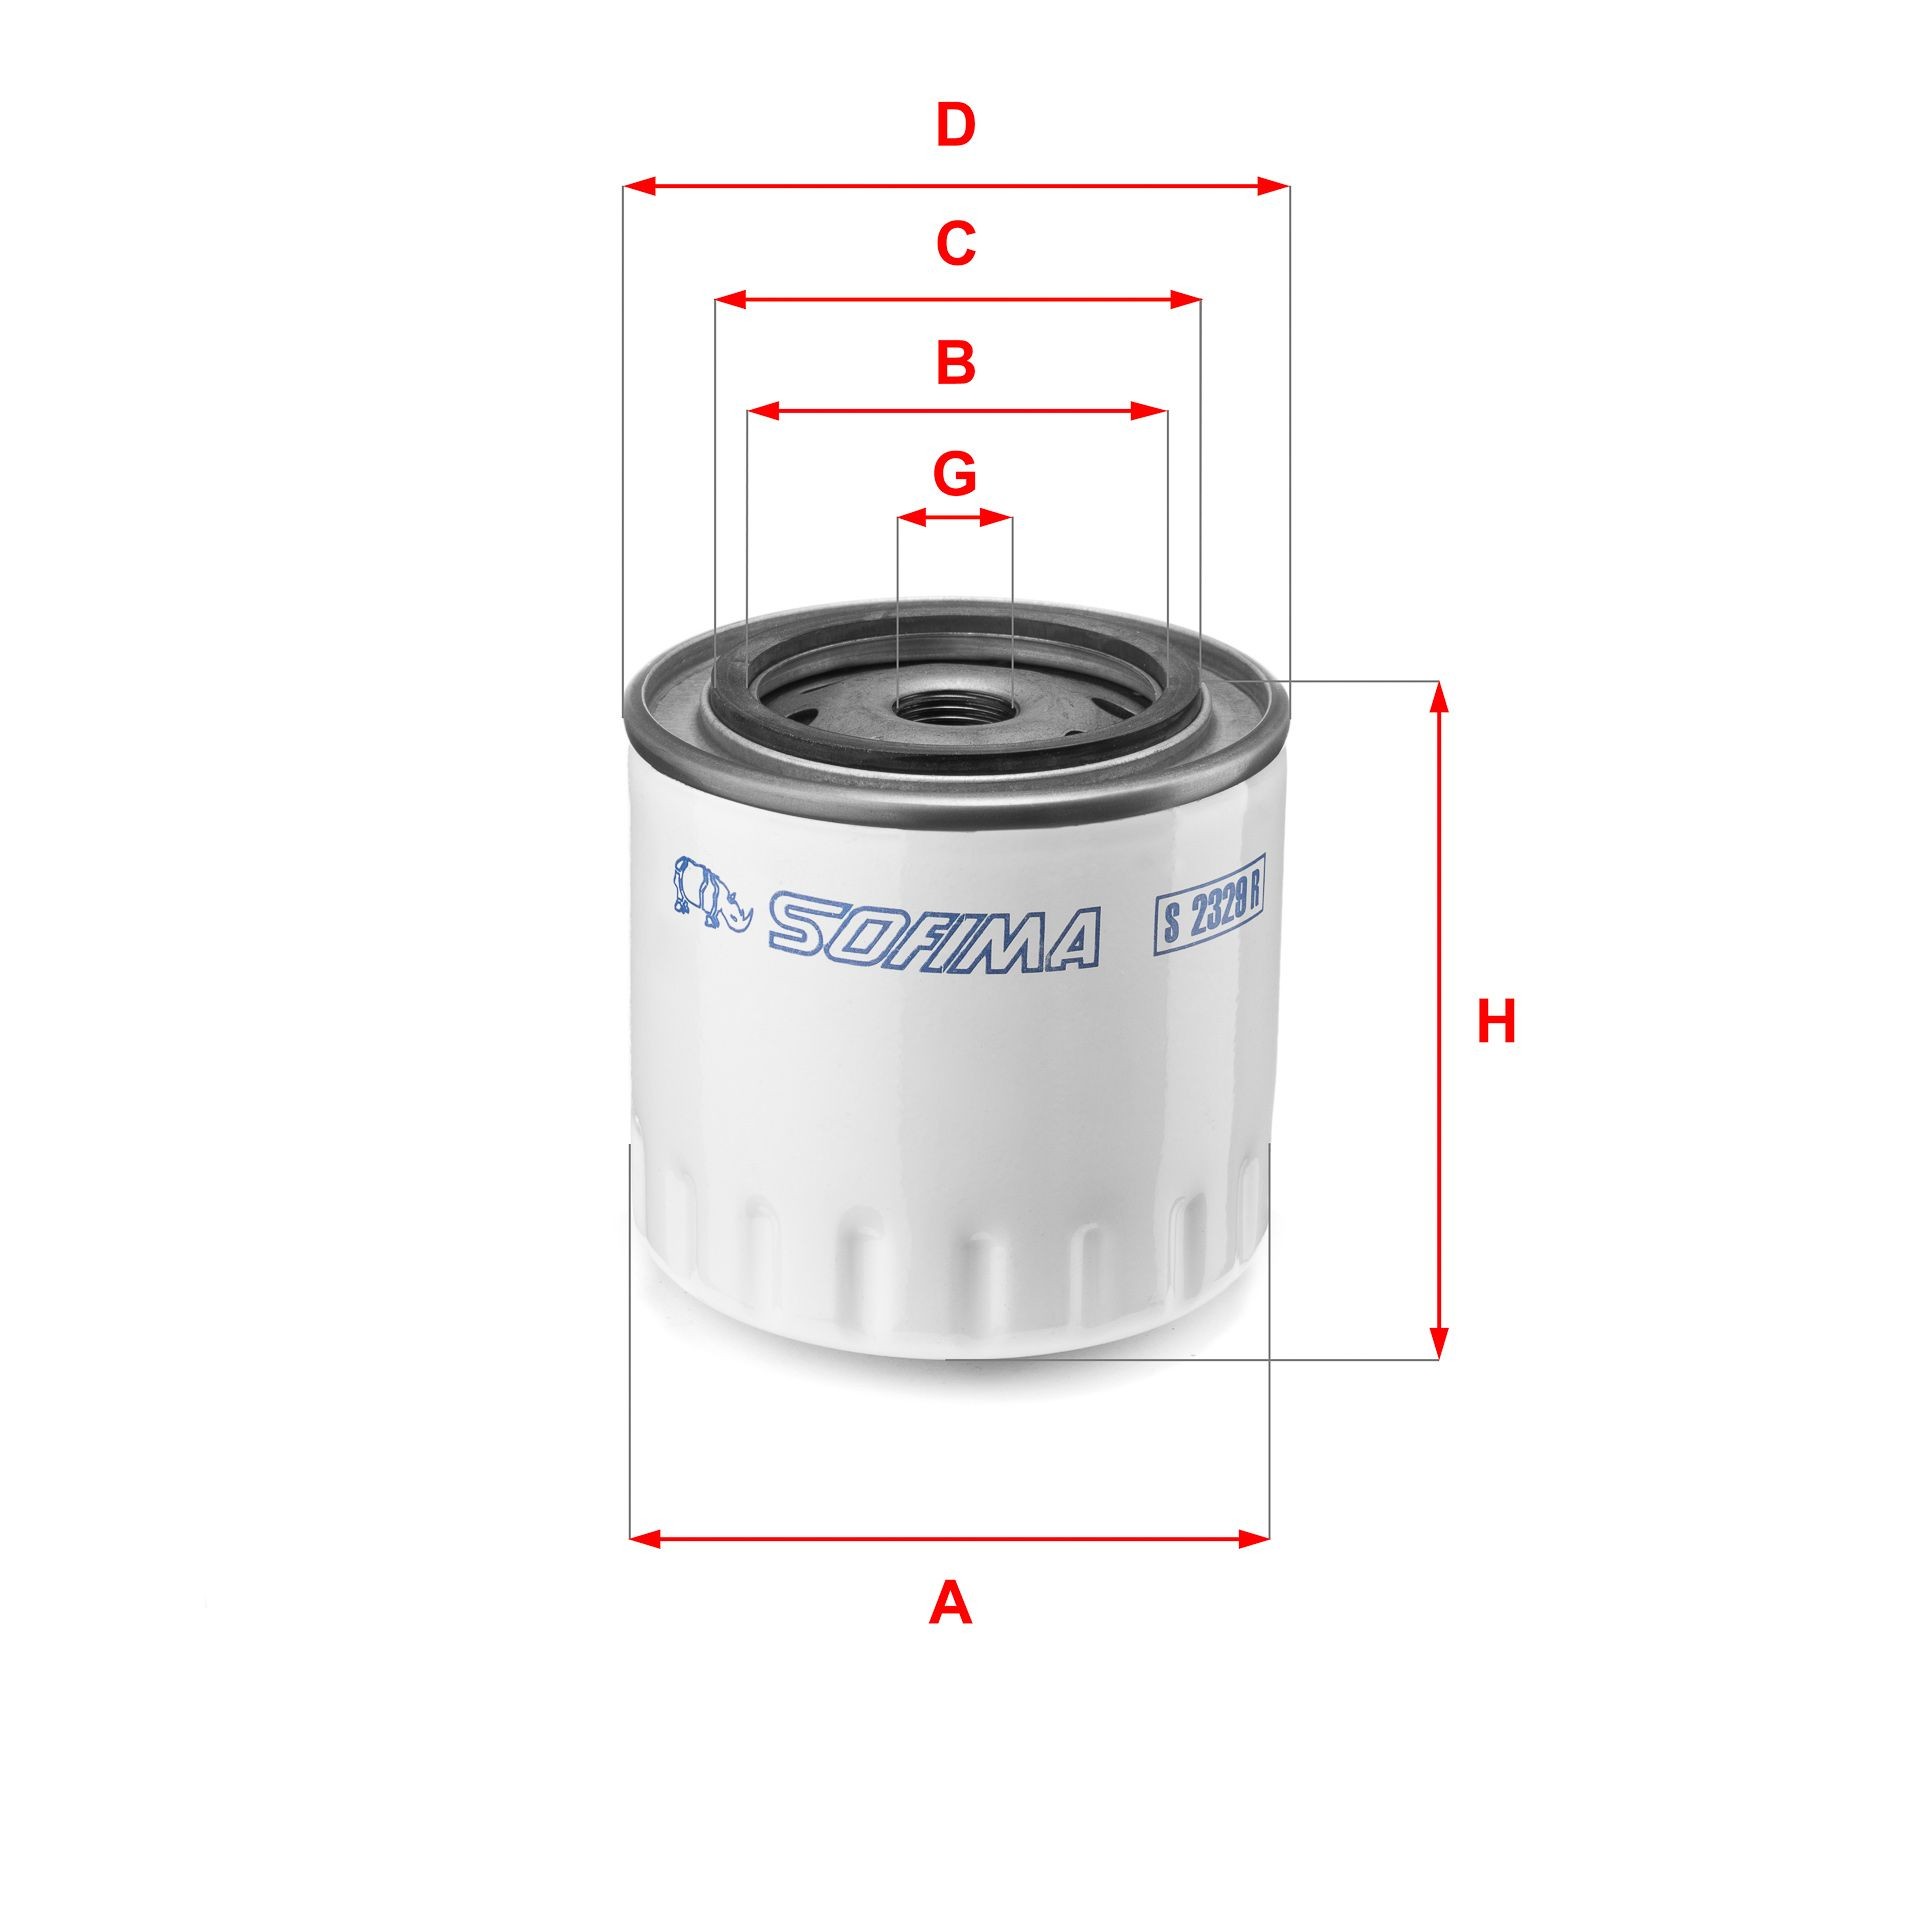 SOFIMA S 2329 R Oil filter 3/4-16 UNF, with one anti-return valve, Spin-on Filter